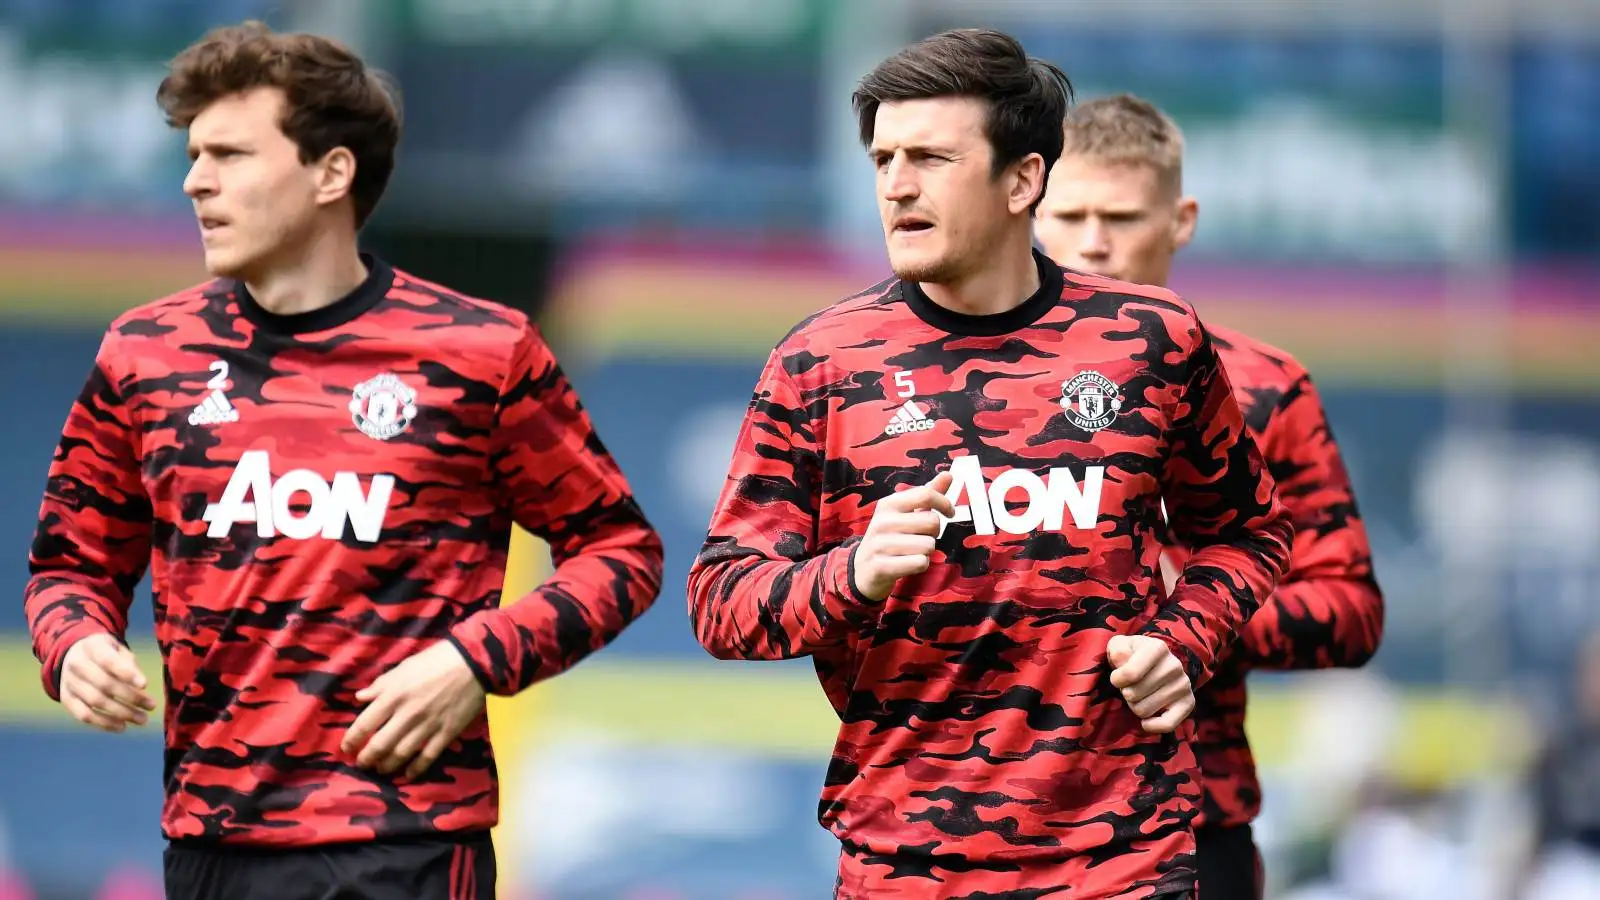 Inter Milan ‘enquire’ about Man Utd defensive duo who have played 111 games together